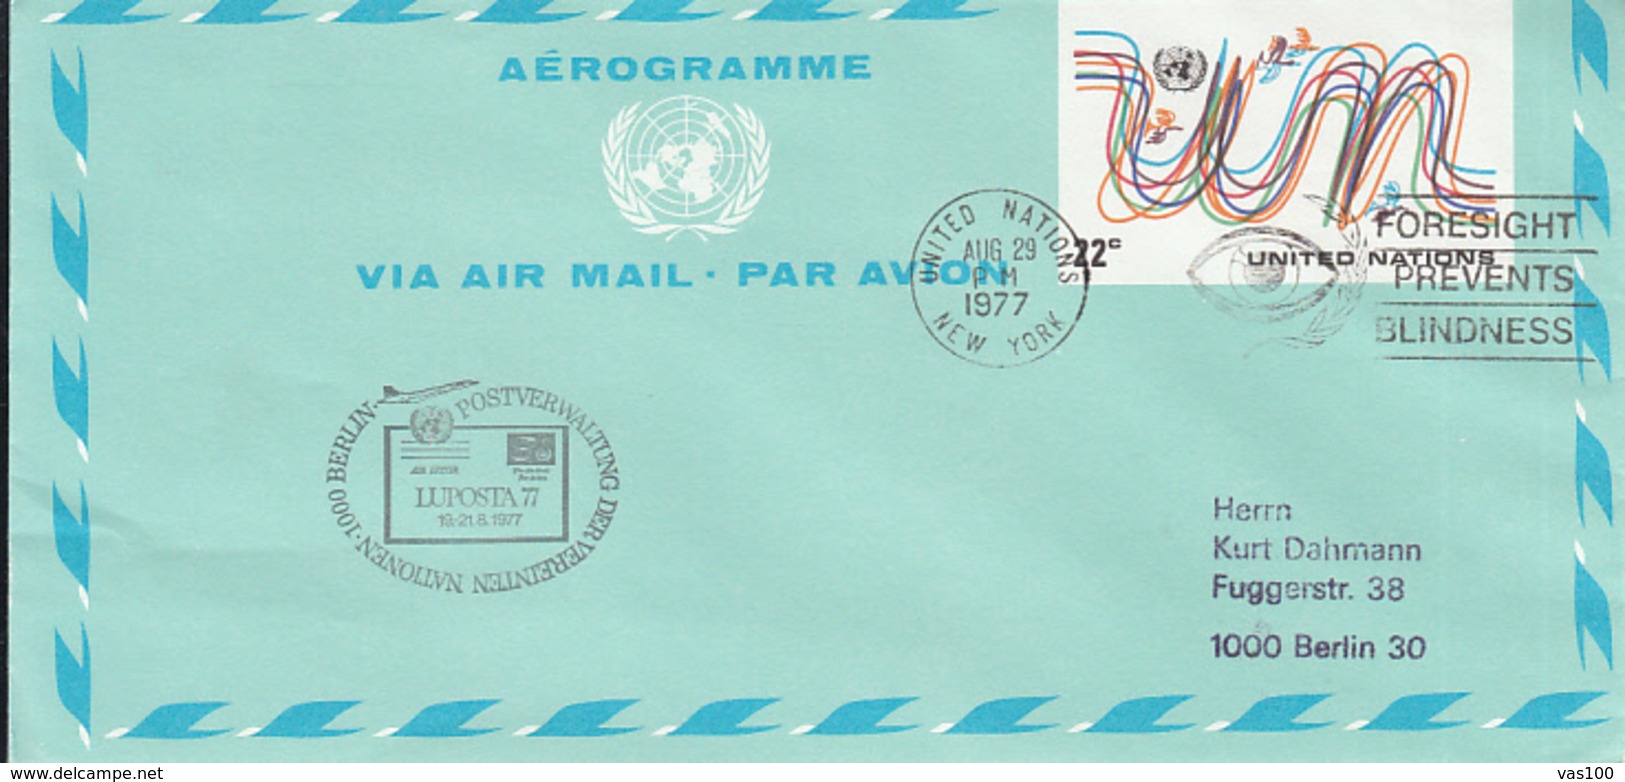 FORESIGHT PREVENTS BLINDNESS SPECIAL POSTMARK ON AEROGRAMME, 1977, UNITED NATIONS - Luftpost